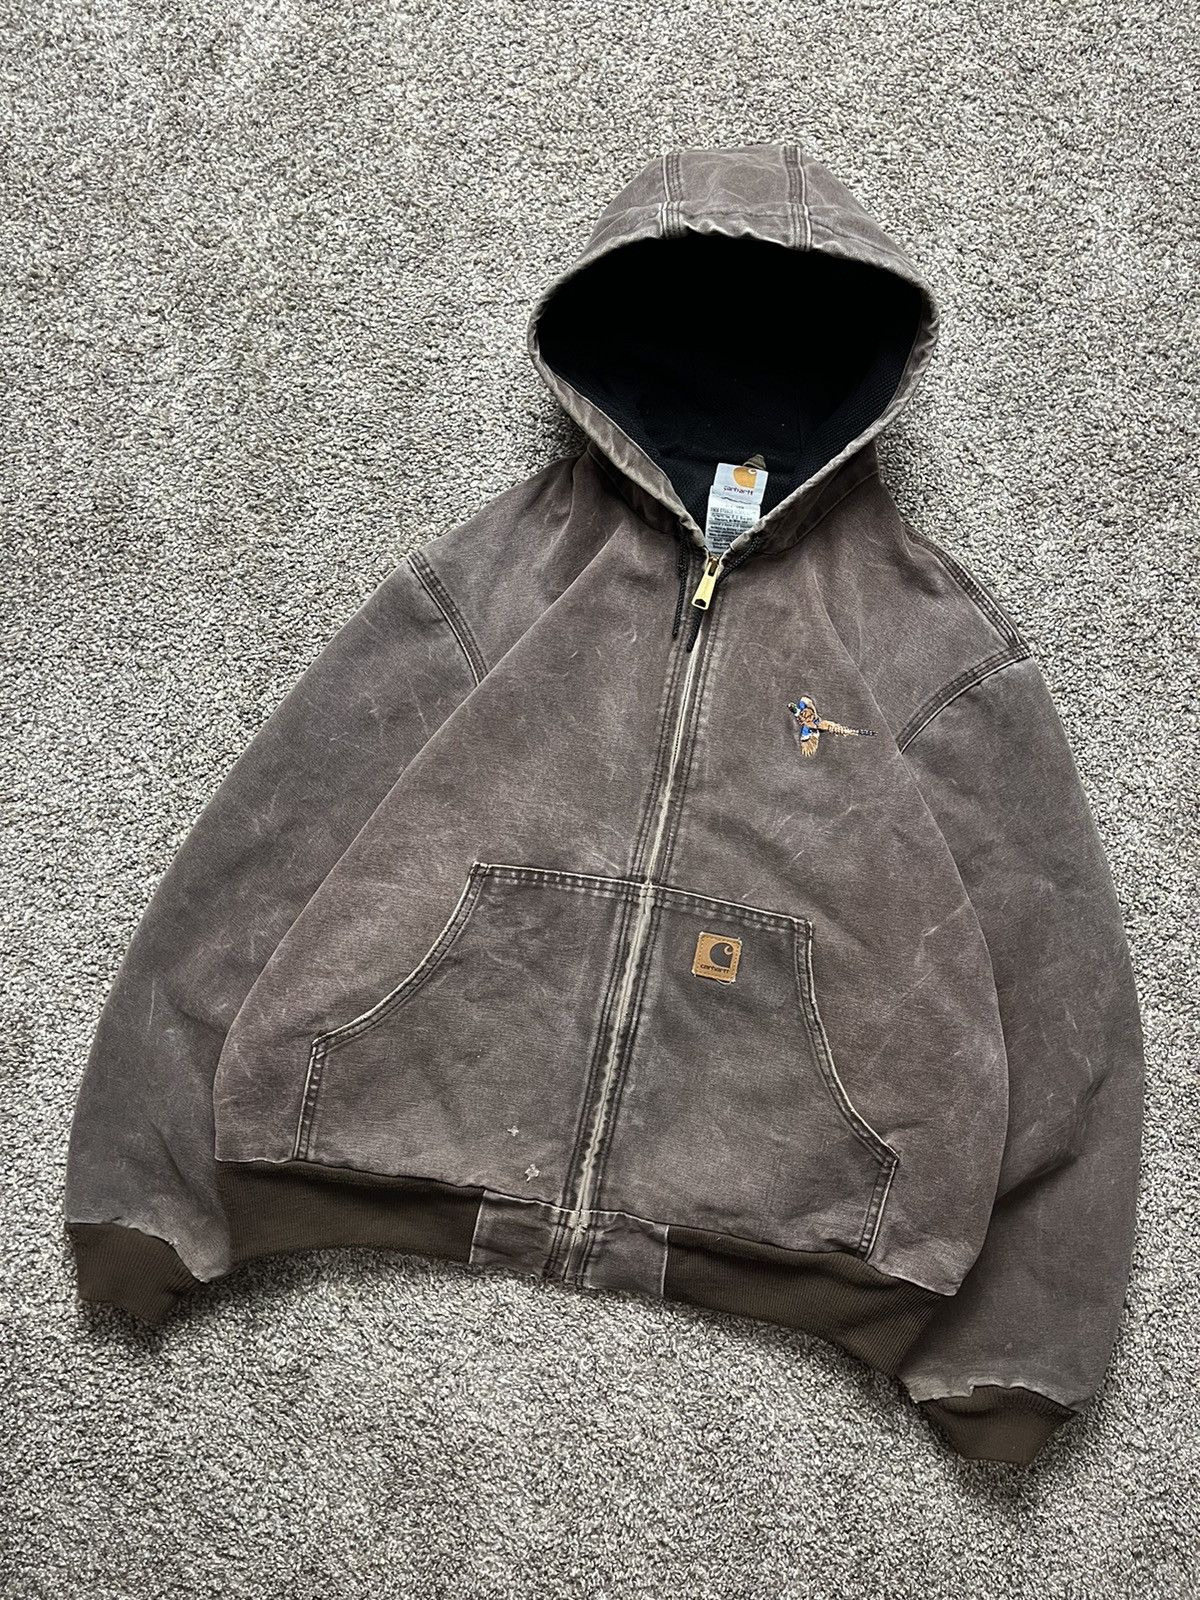 Pre-owned Carhartt X Vintage Carhartt Sunfaded Brown Hooded Jacket Large 24x27